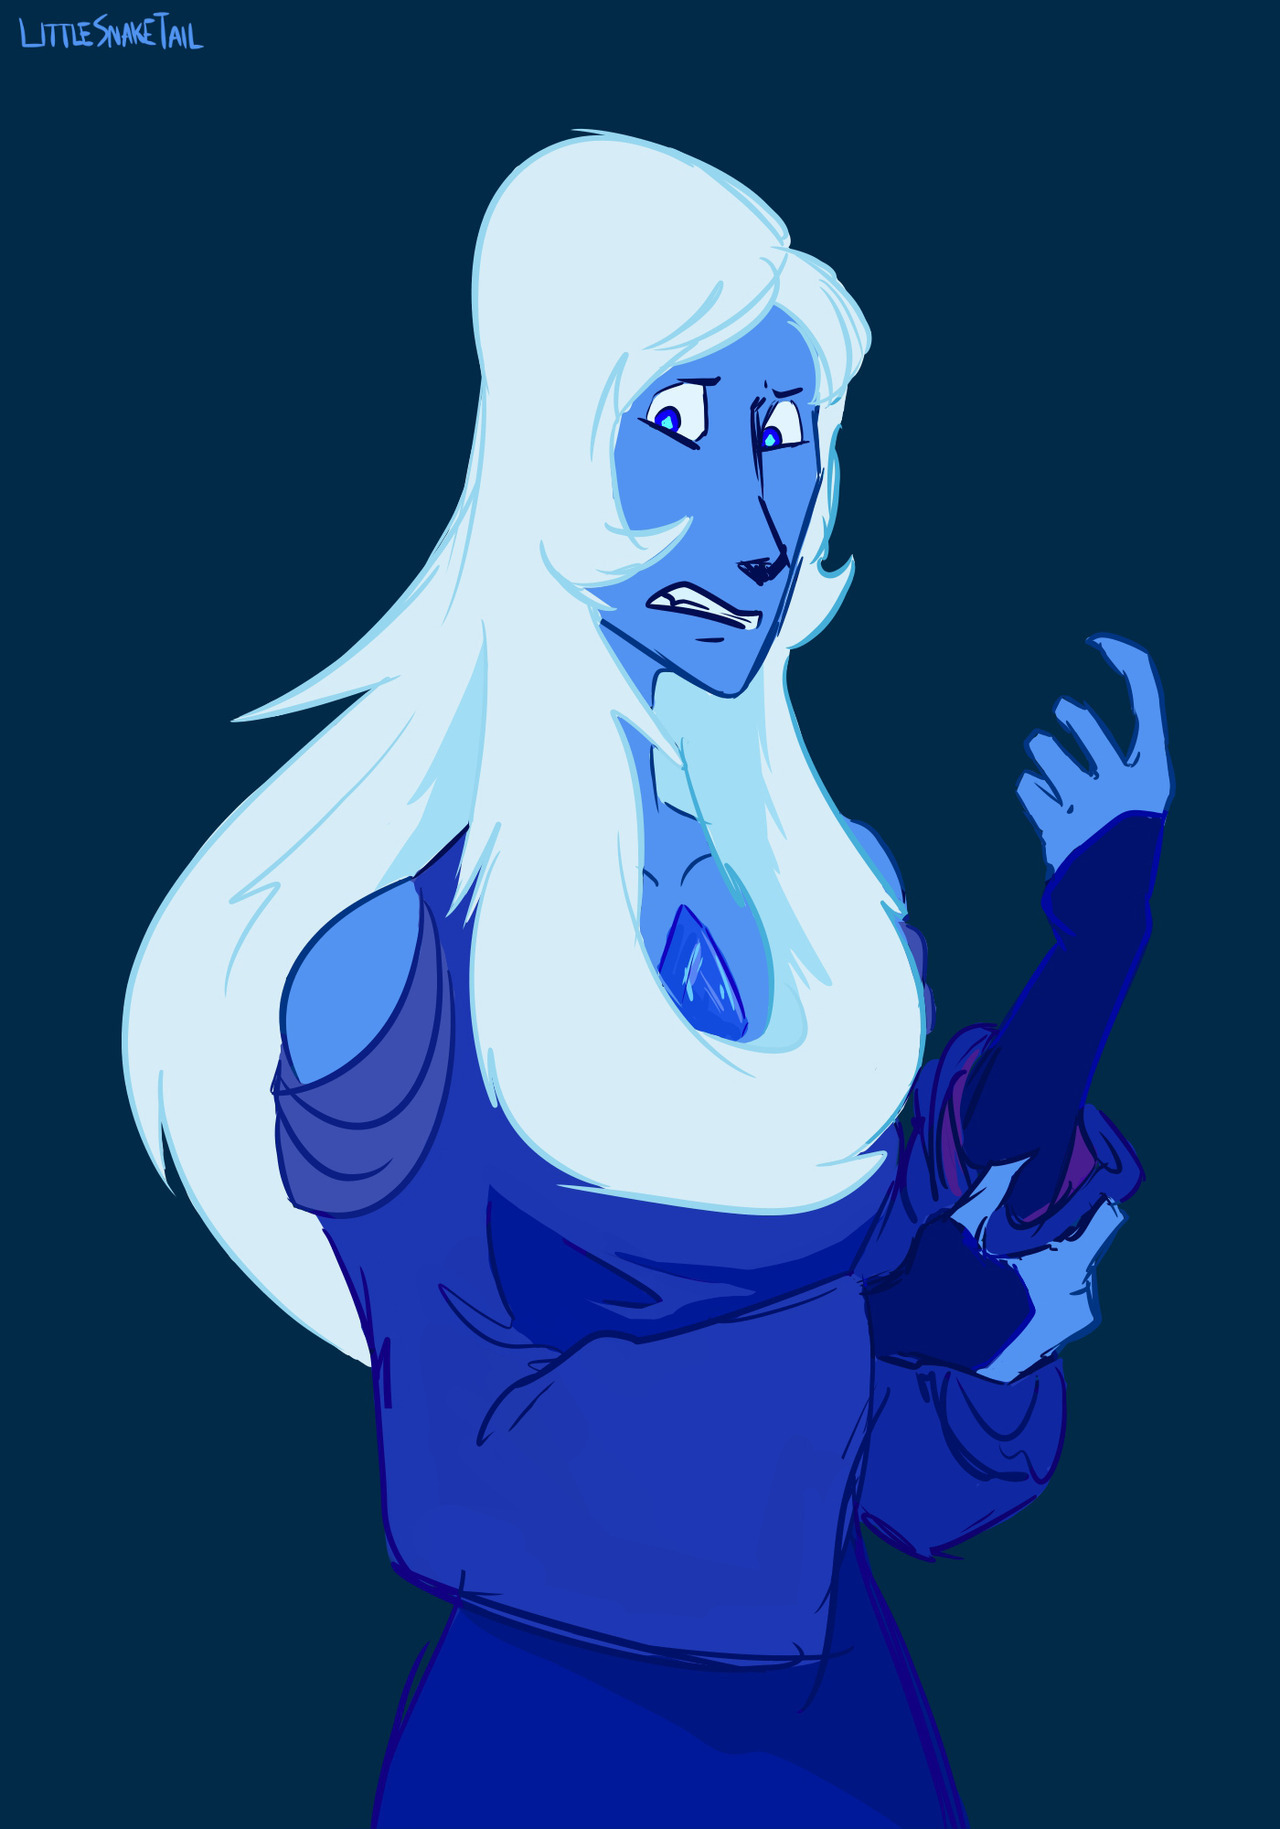 Another Blue Diamond I drew on FireAlpaca some time ago. Feels a bit repetitive, but eh…